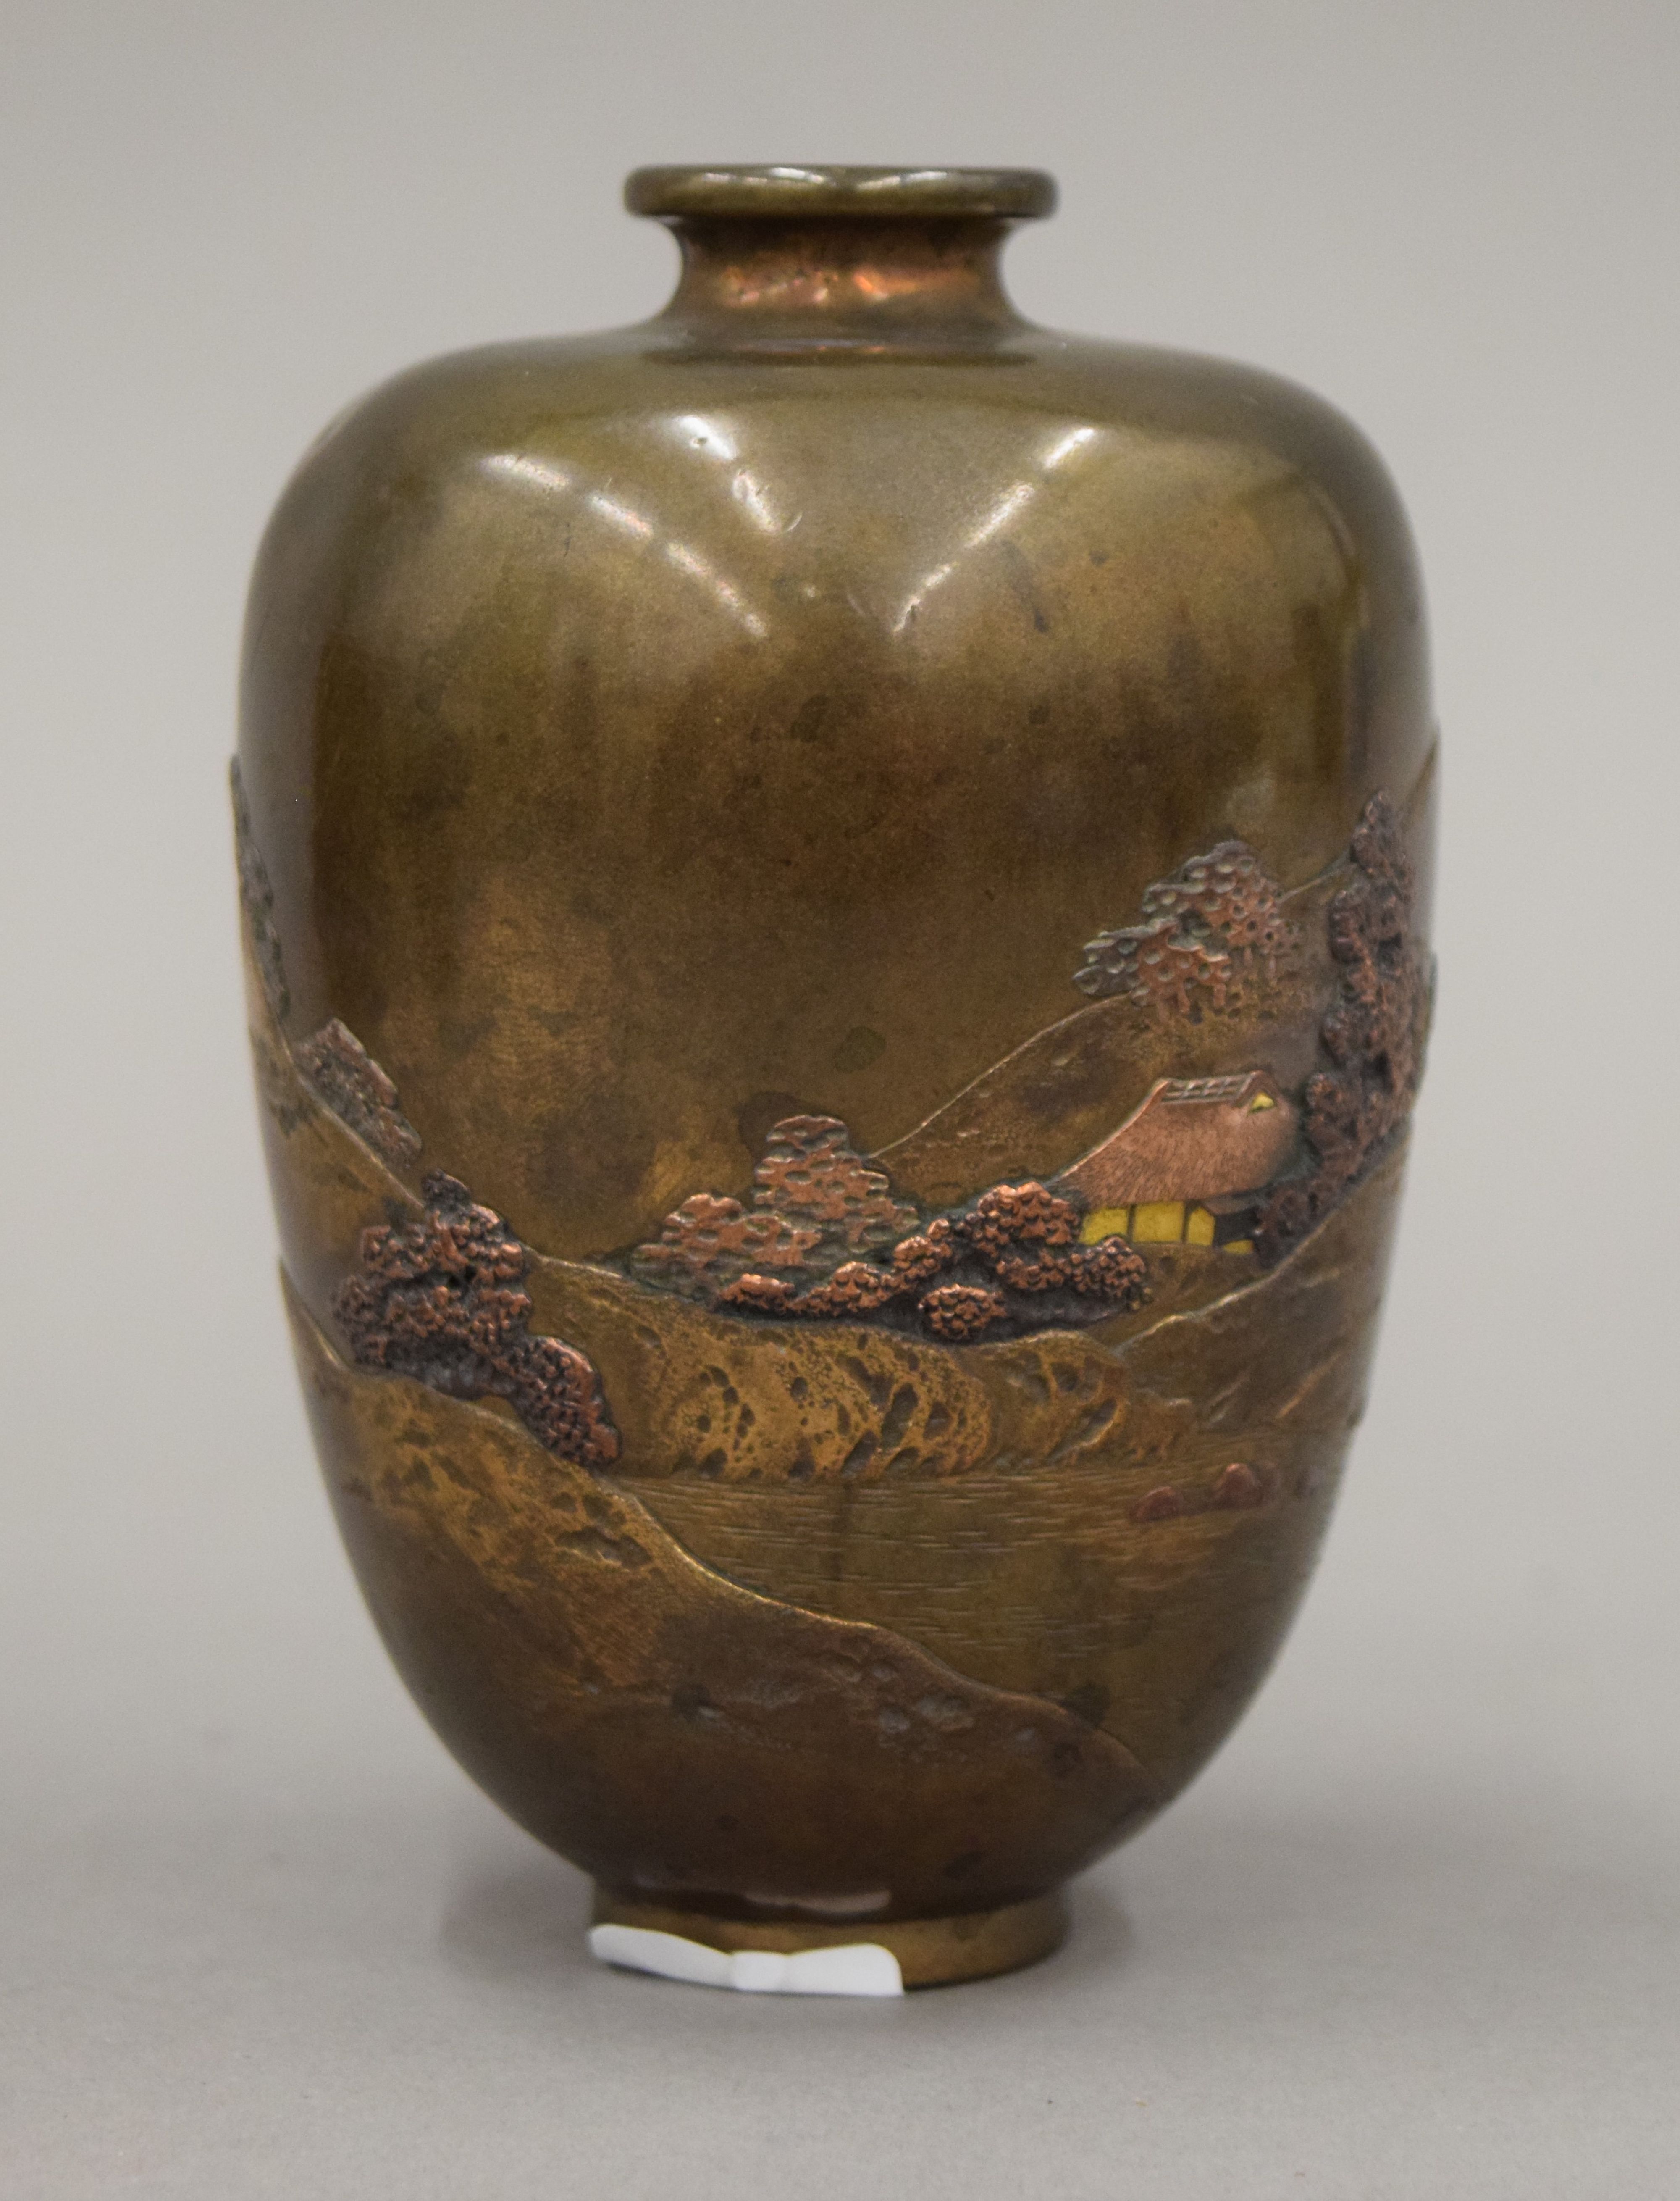 A Meiji Period Japanese gold inlaid bronze vase. 11 cm high. - Image 2 of 4